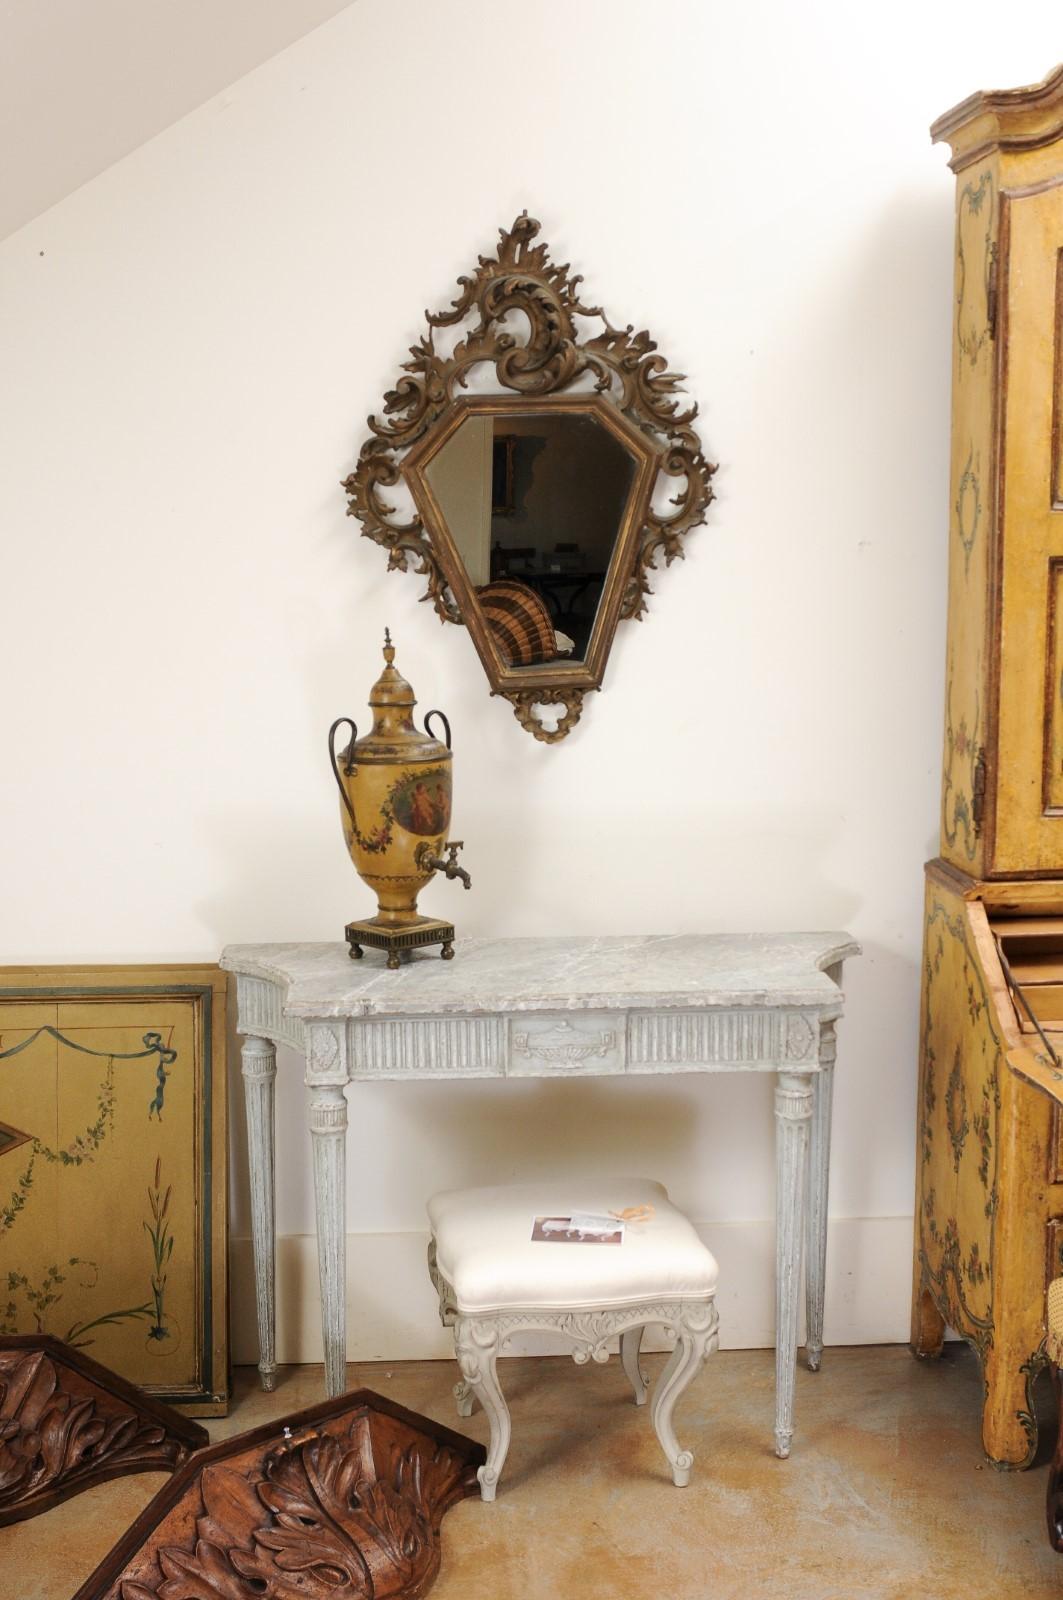 An Italian Rococo style carved mirror from the 19th century, with traces of gilt. Created in Italy during the 19th century, this piece features a polygonal mirror plate surrounded by an eye-catching carved frame showcasing Rocailles c-scrolls and